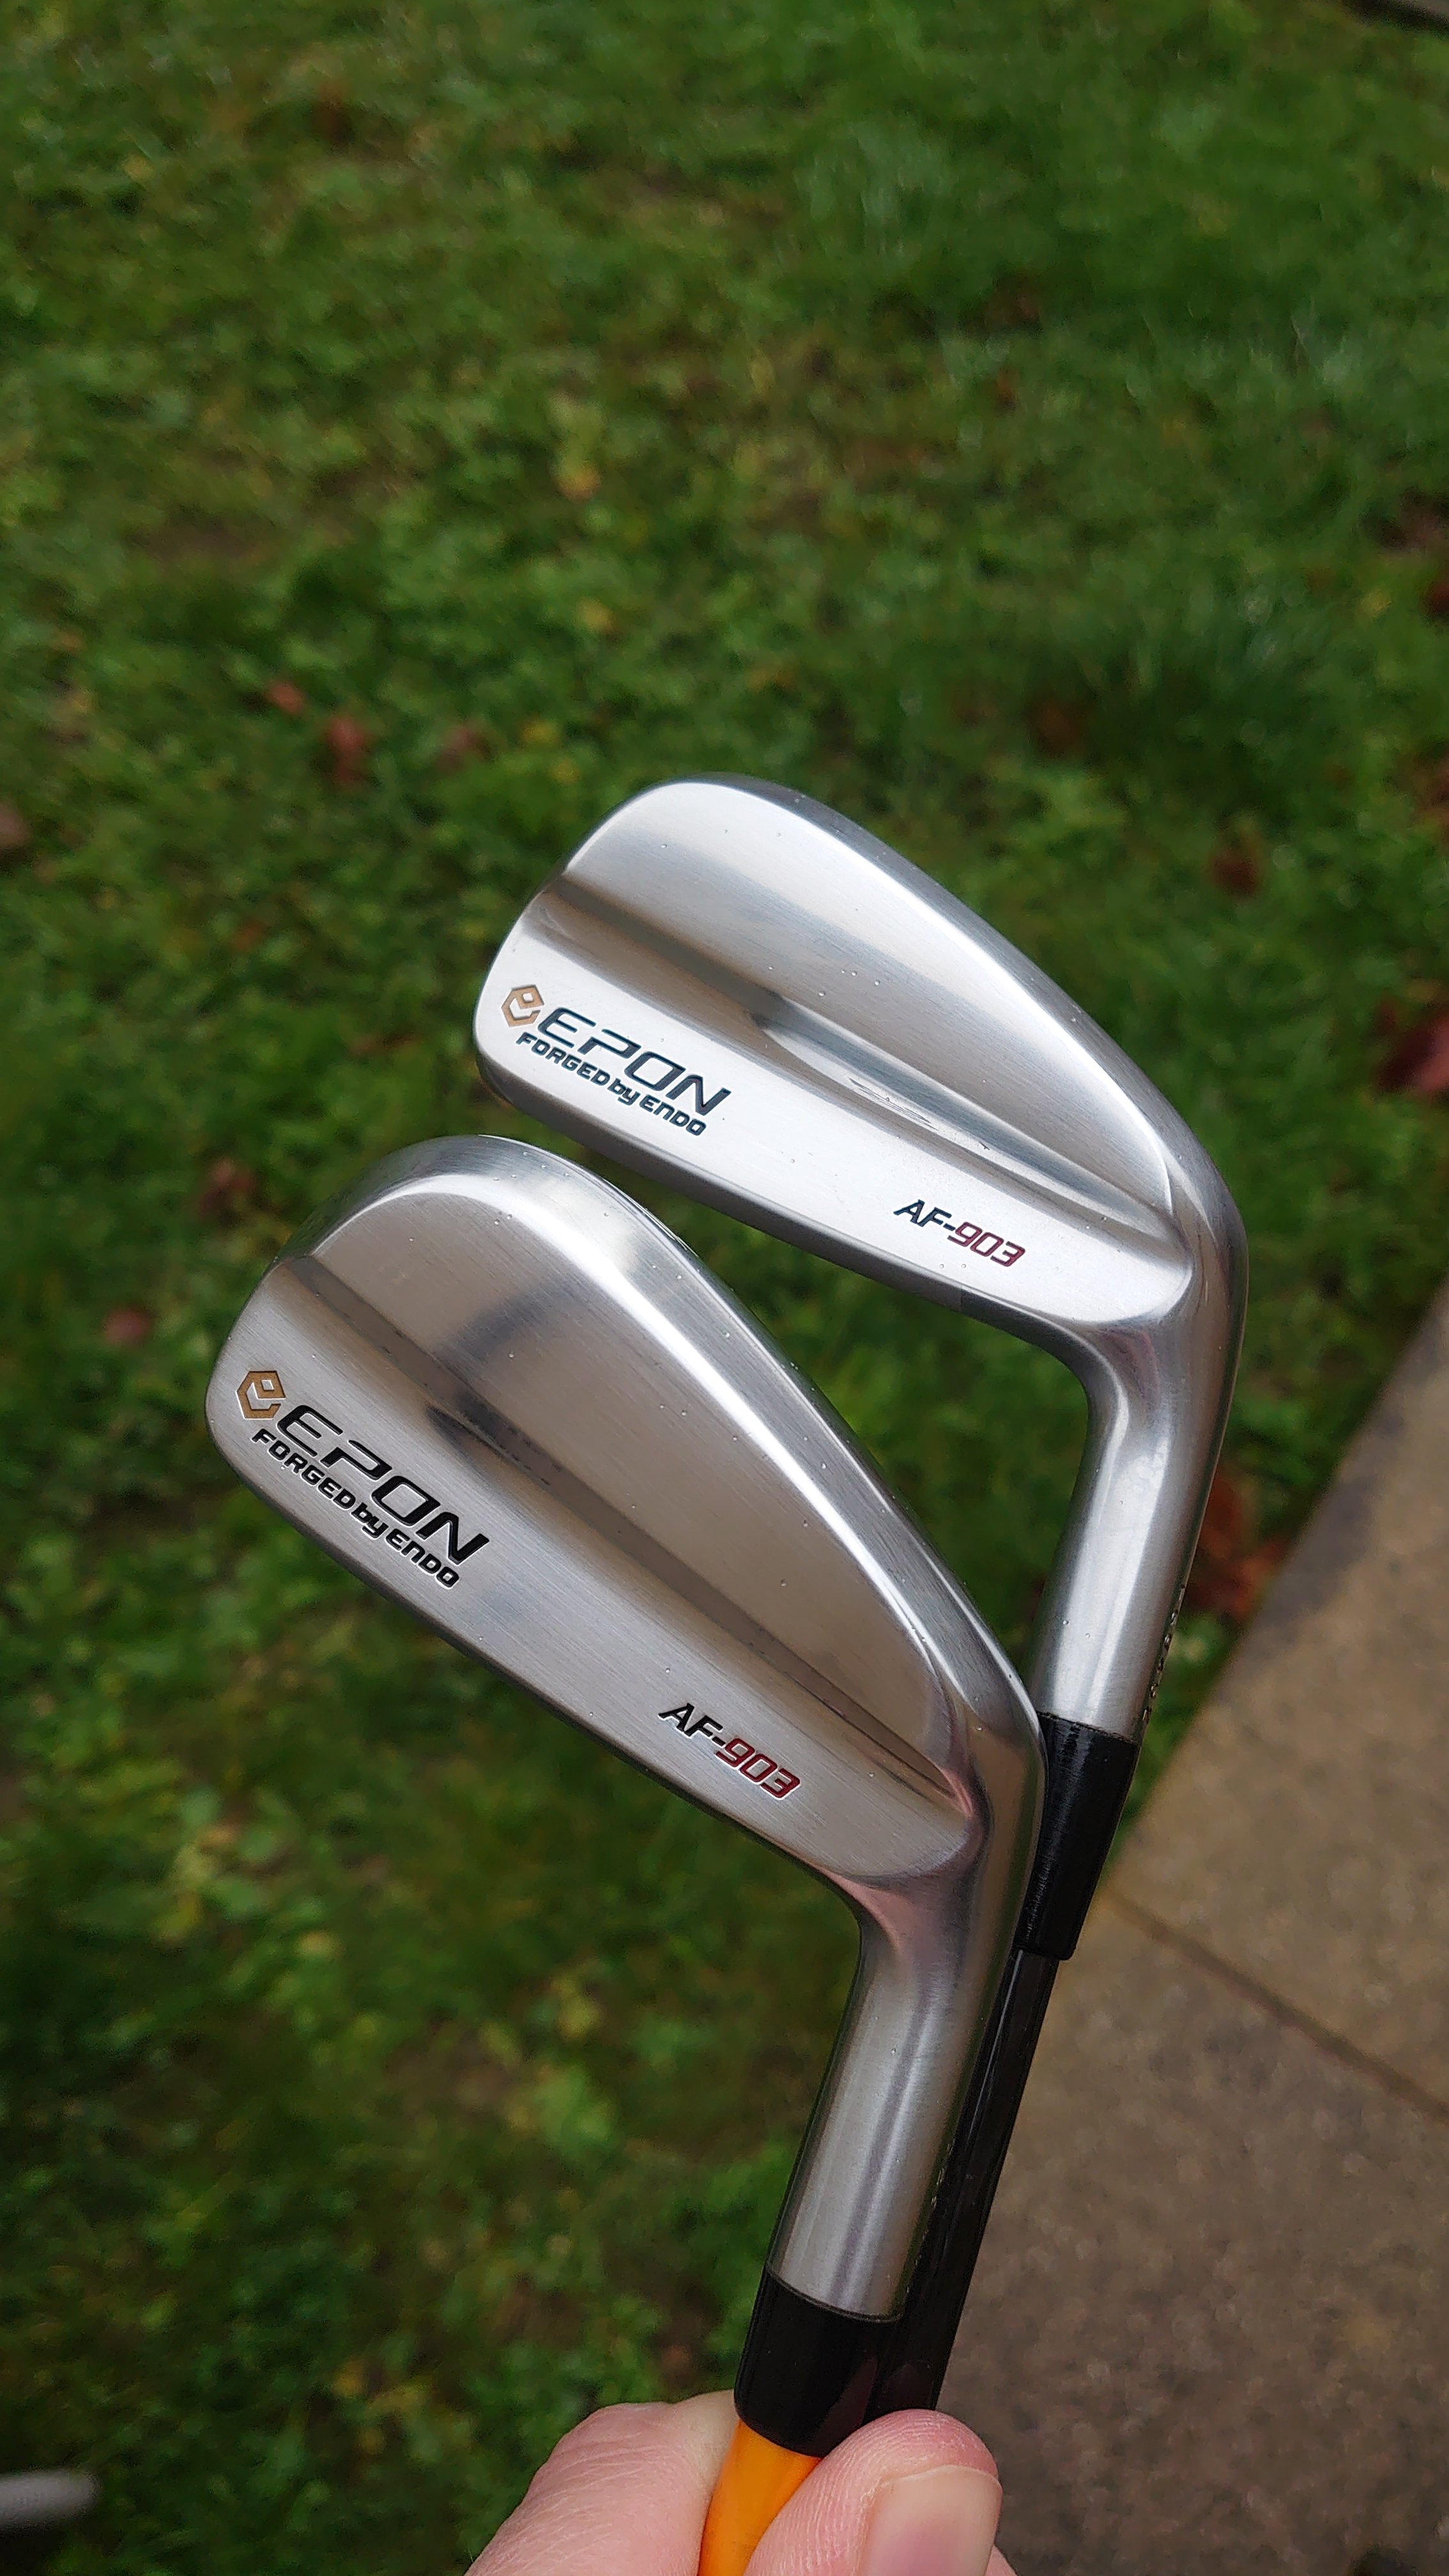 Epon AF 903 DI's 20°/23° OT Tour 120x and spare shafts. - Buy 